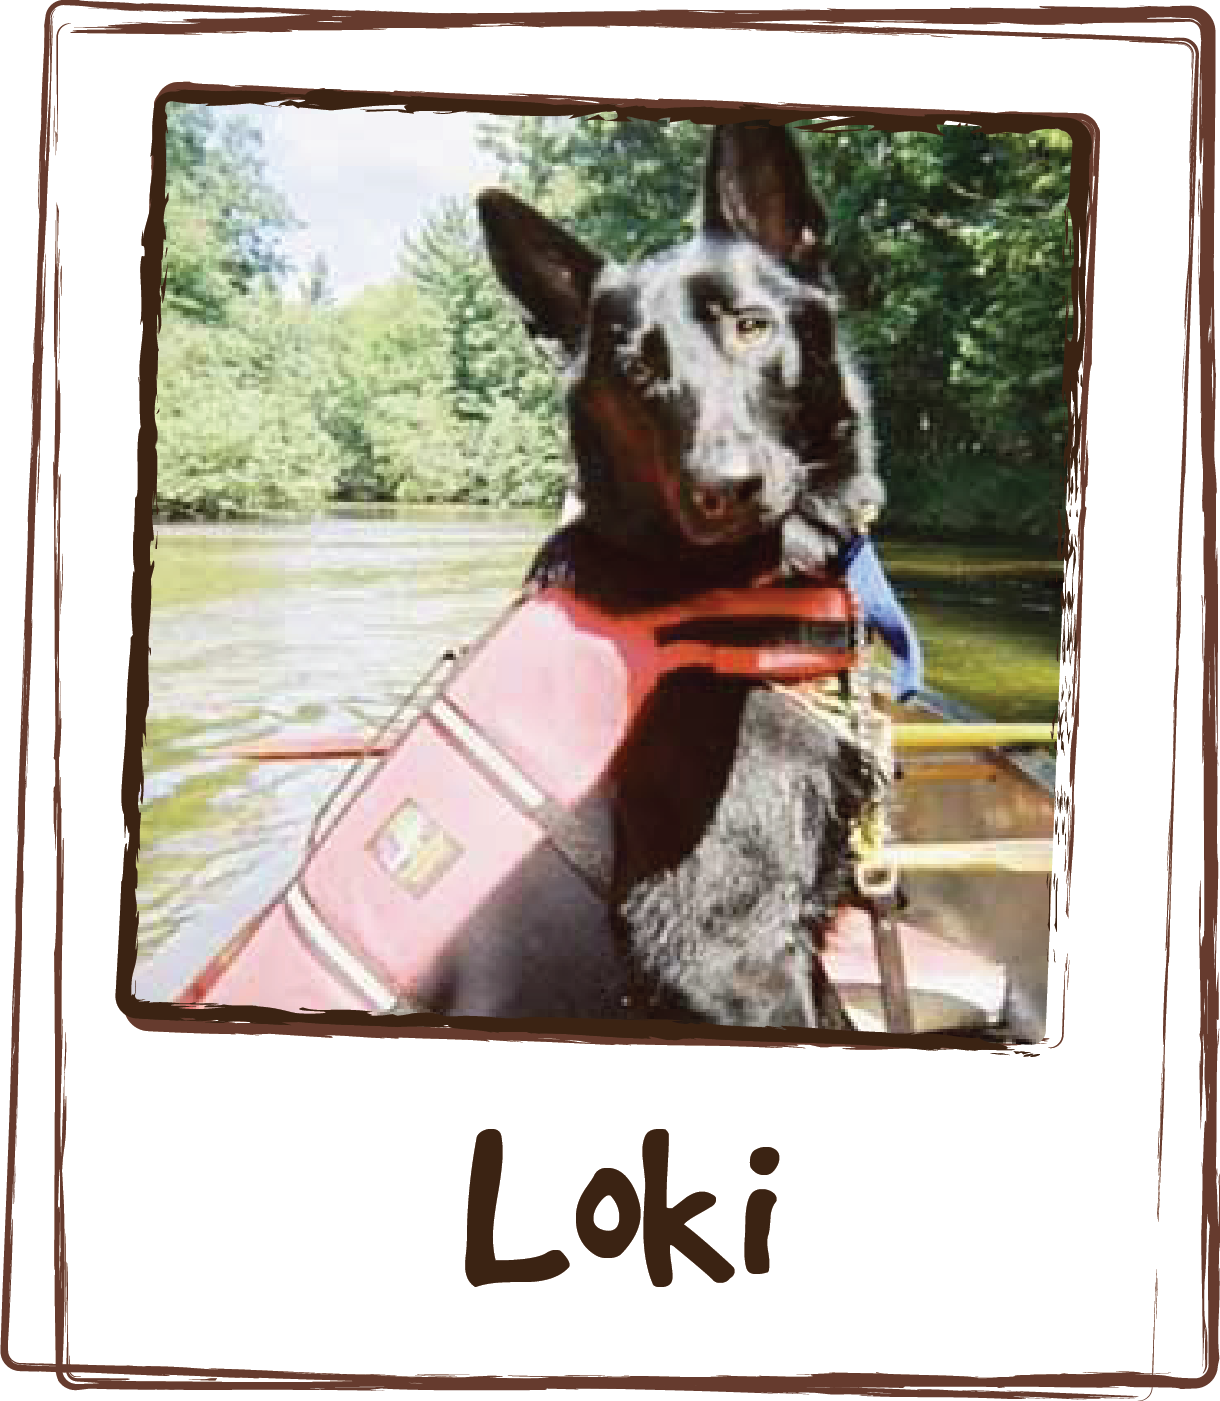  “I am writing to Thank You for developing such a GREAT product! For the past 6 weeks, I have been using the Joint and Heart formula with my 11 year old German Shepherd, Loki. Loki is still a very active dog, and loves to take on new challenges. Rece